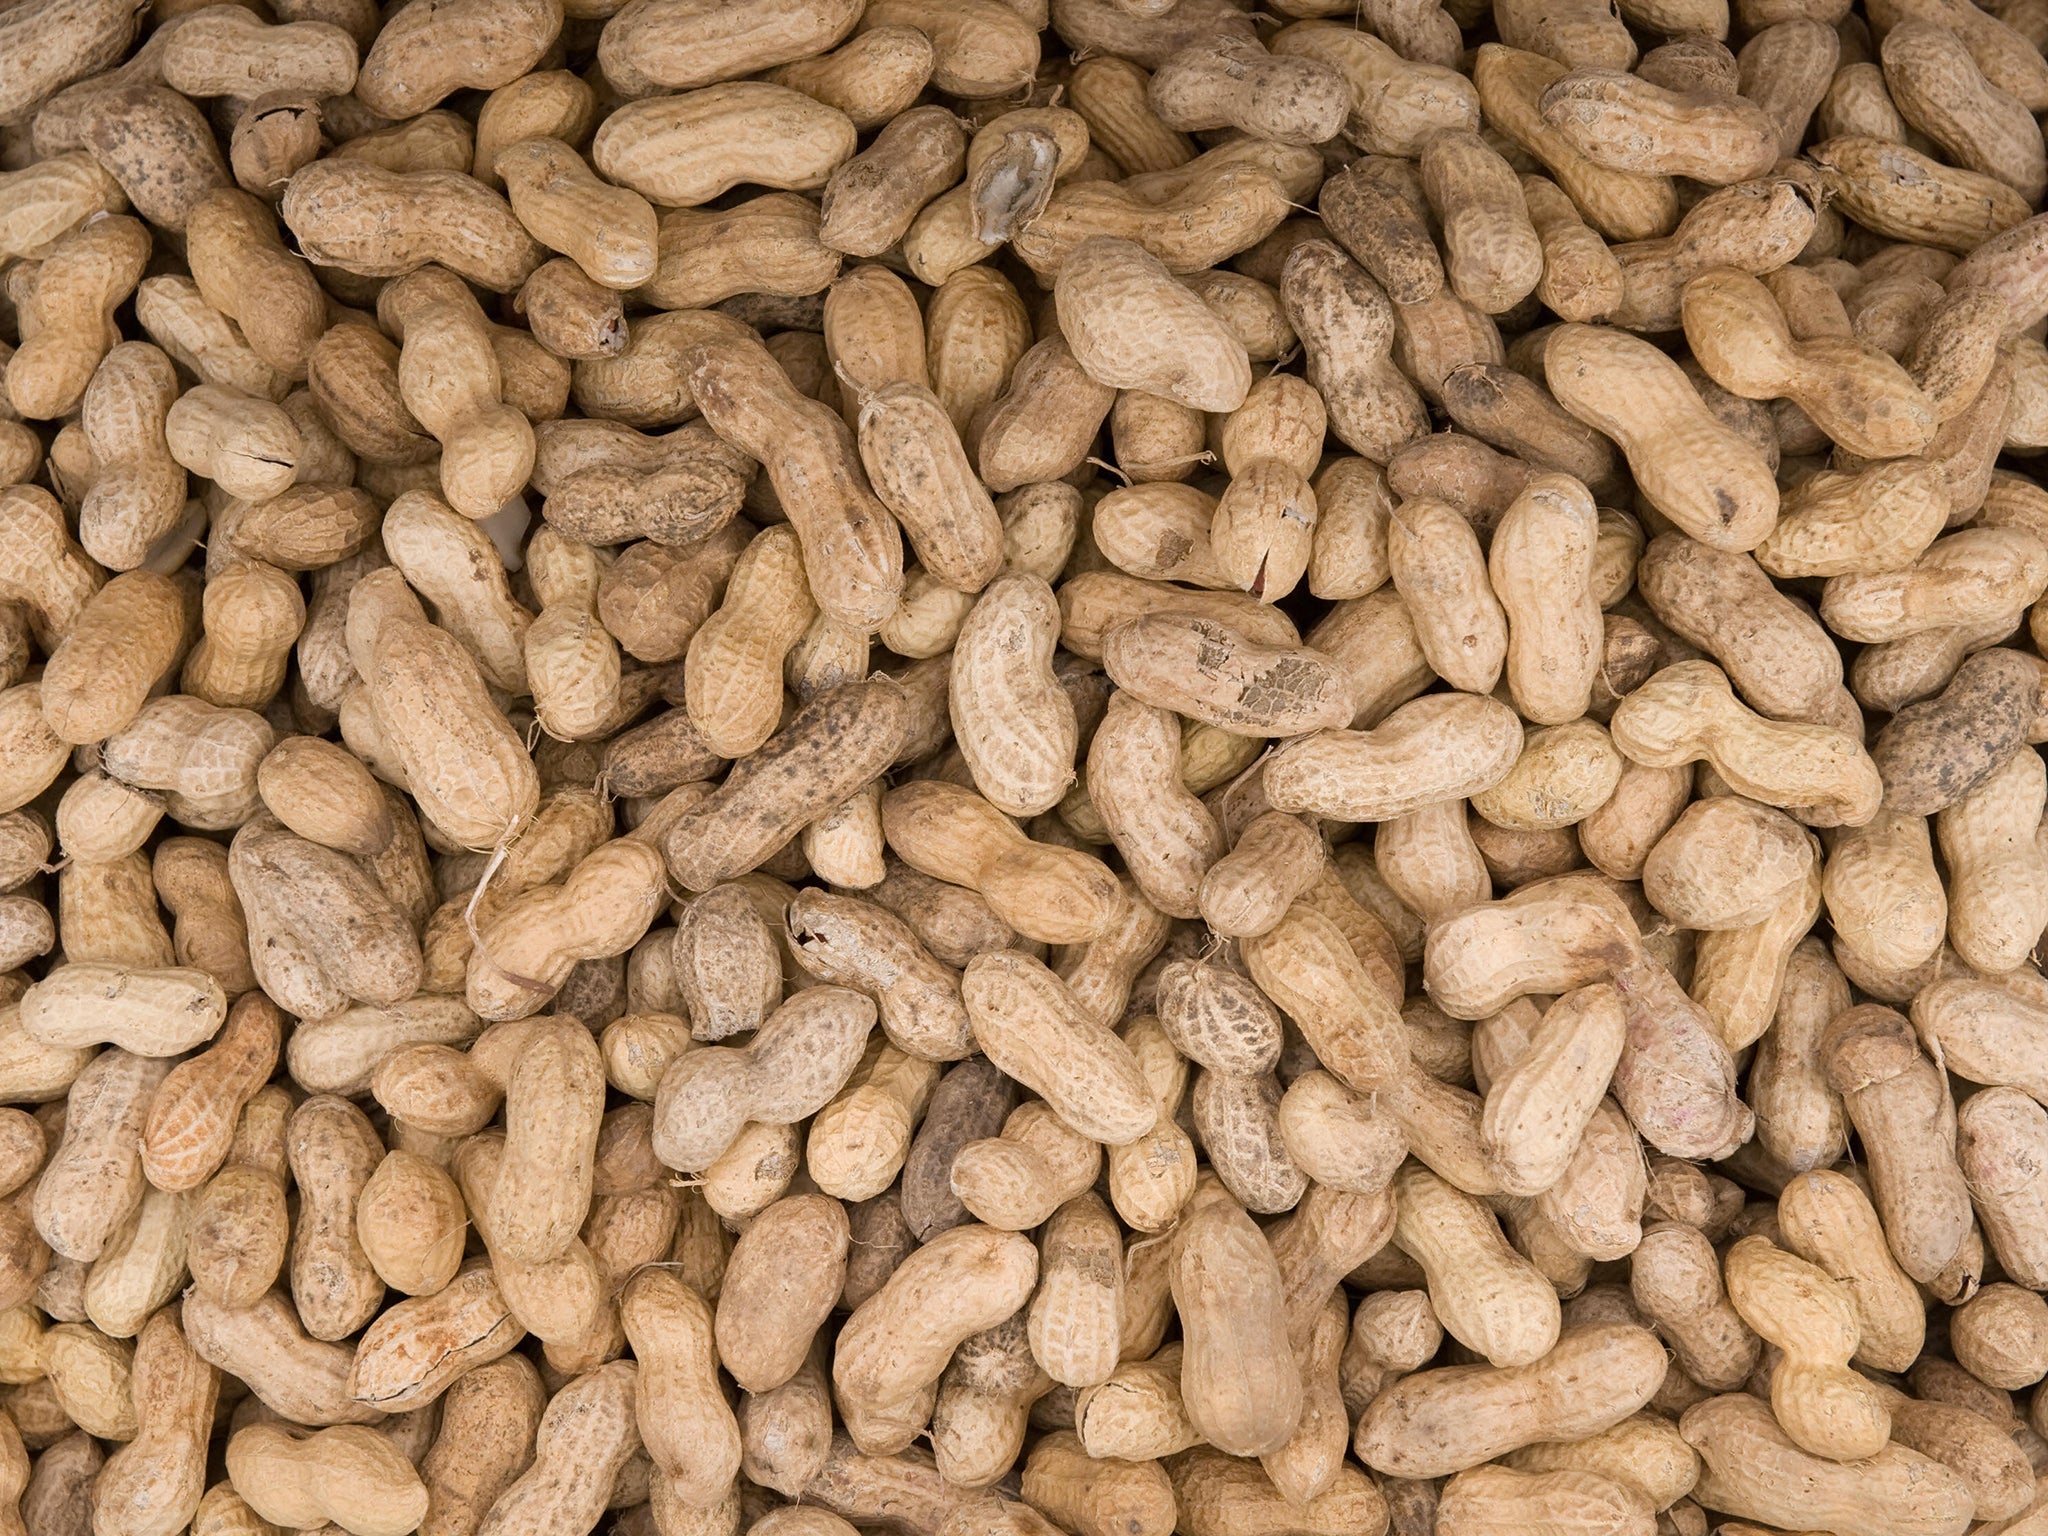 Britain's peanut allergy sufferers have been put on high alert